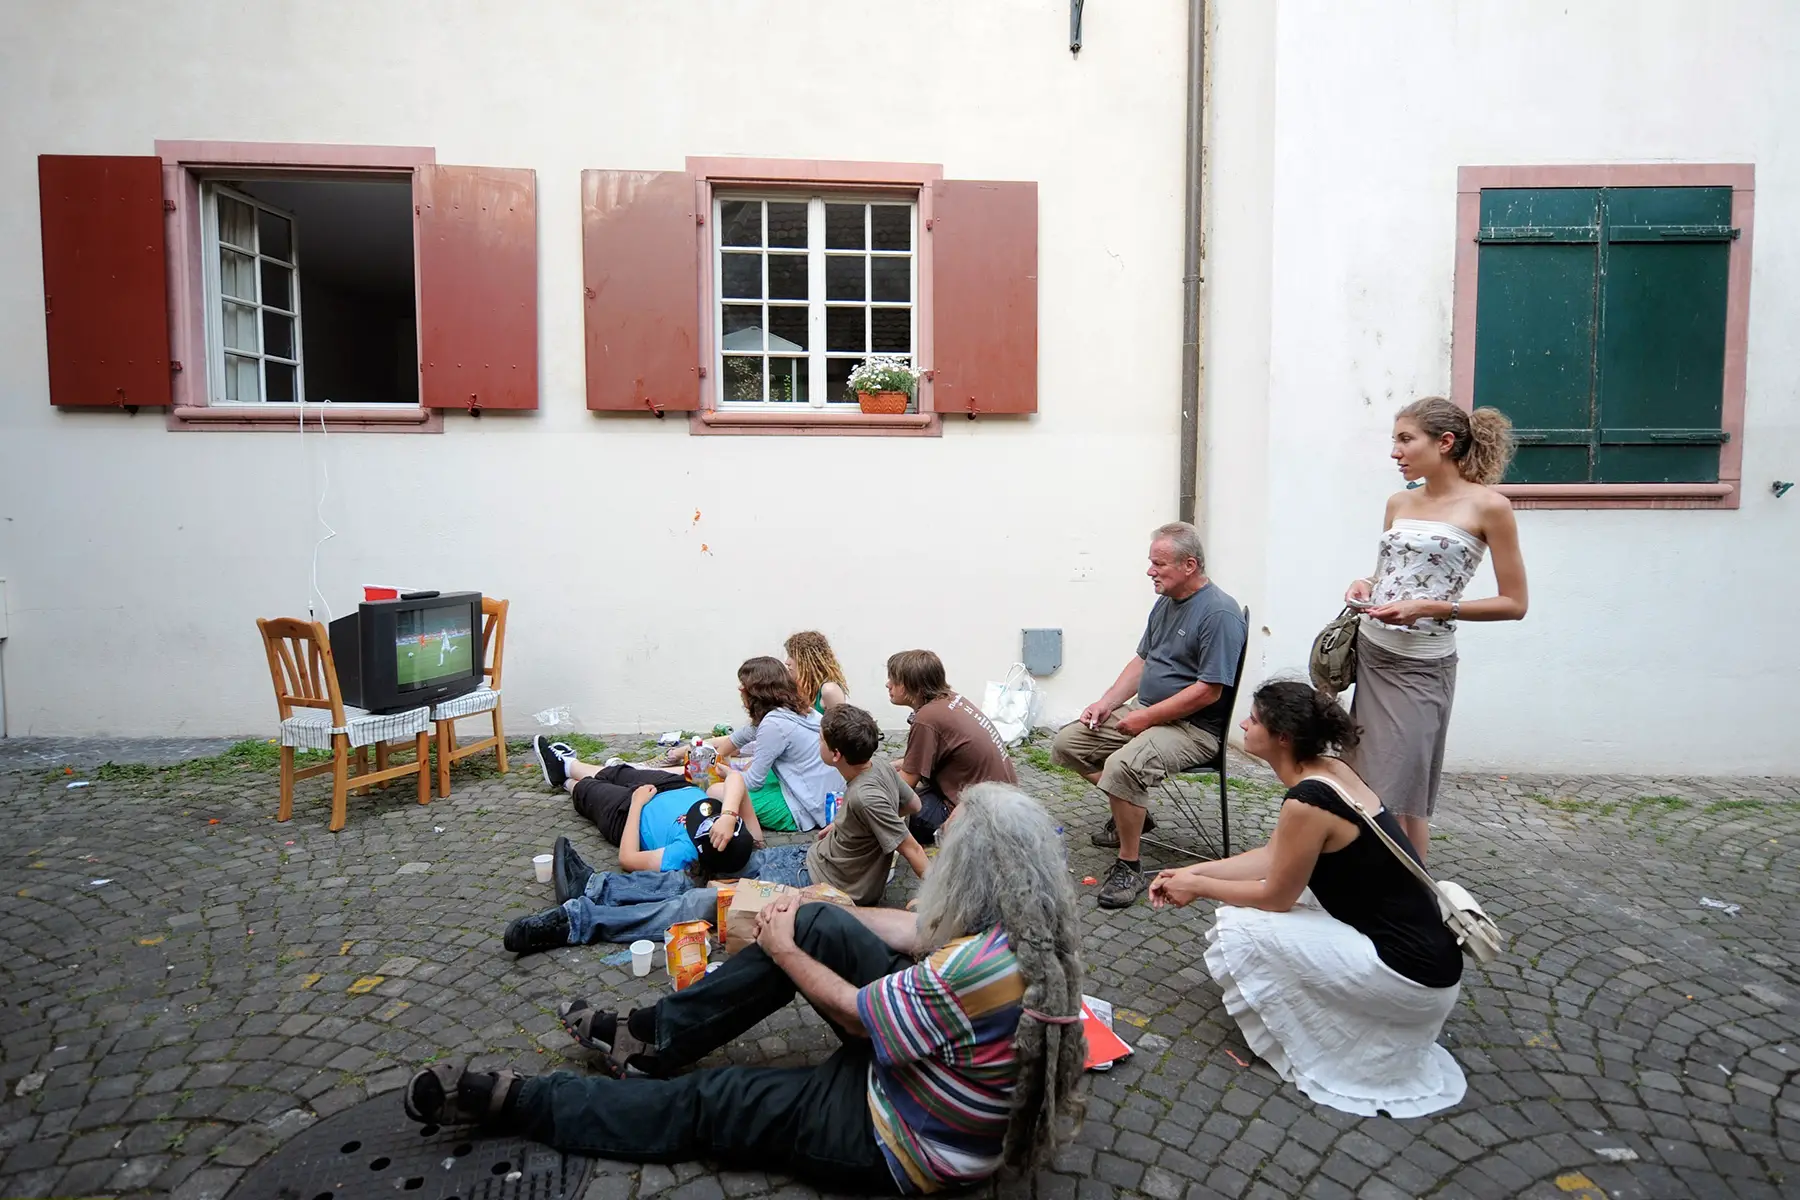 Family watching football on TV in Basel, Switzerland